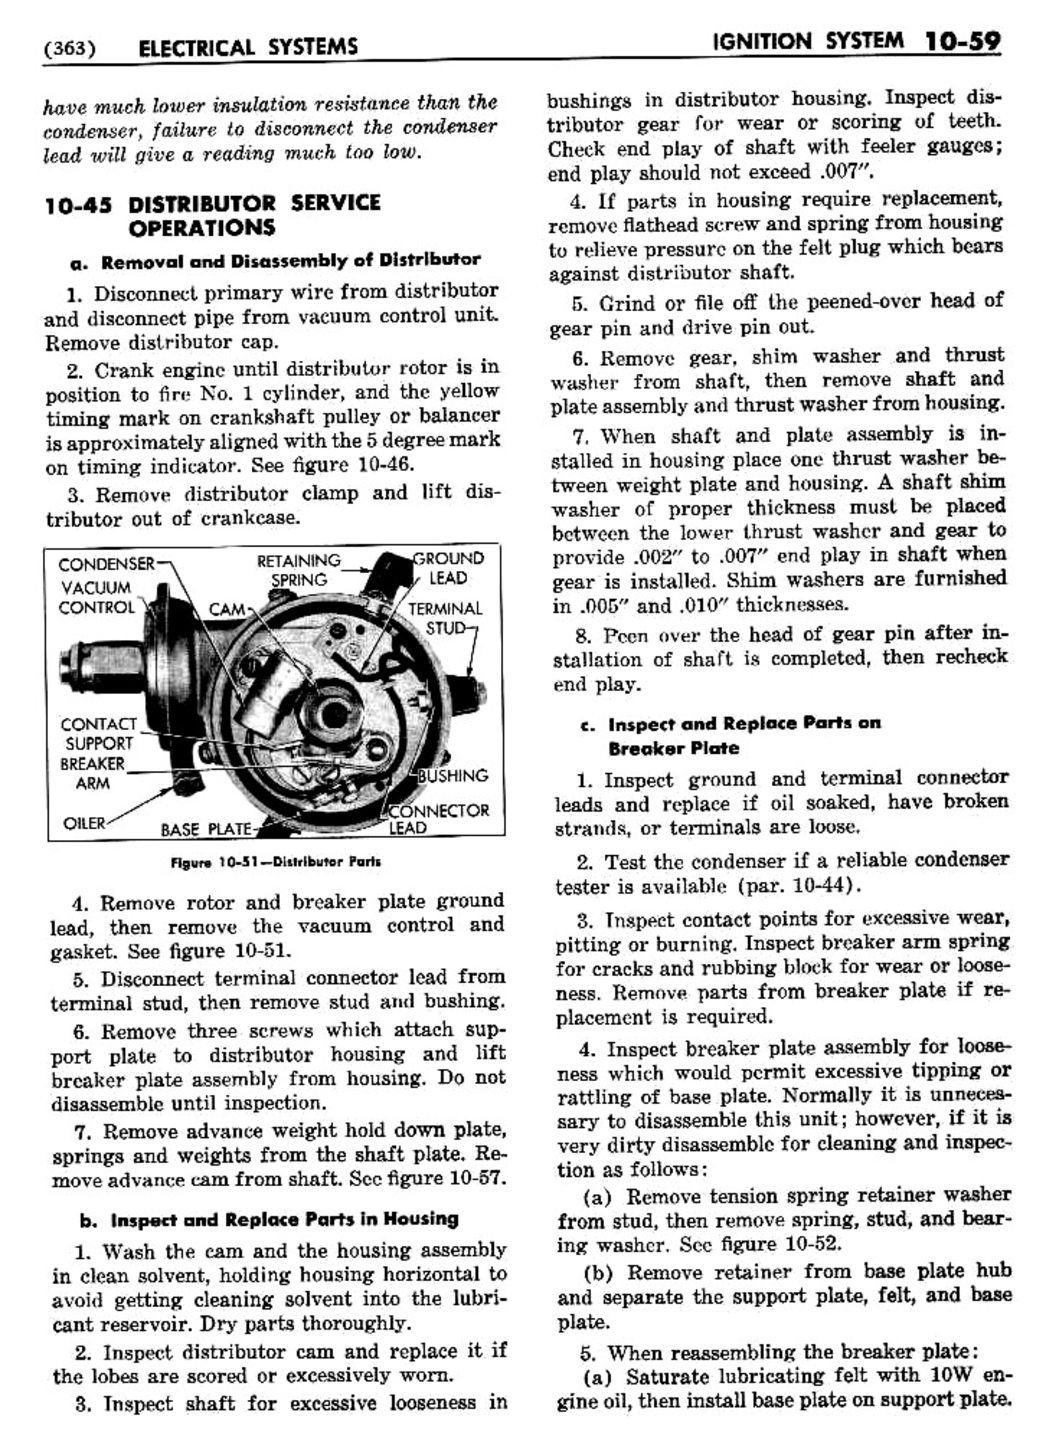 n_11 1955 Buick Shop Manual - Electrical Systems-059-059.jpg